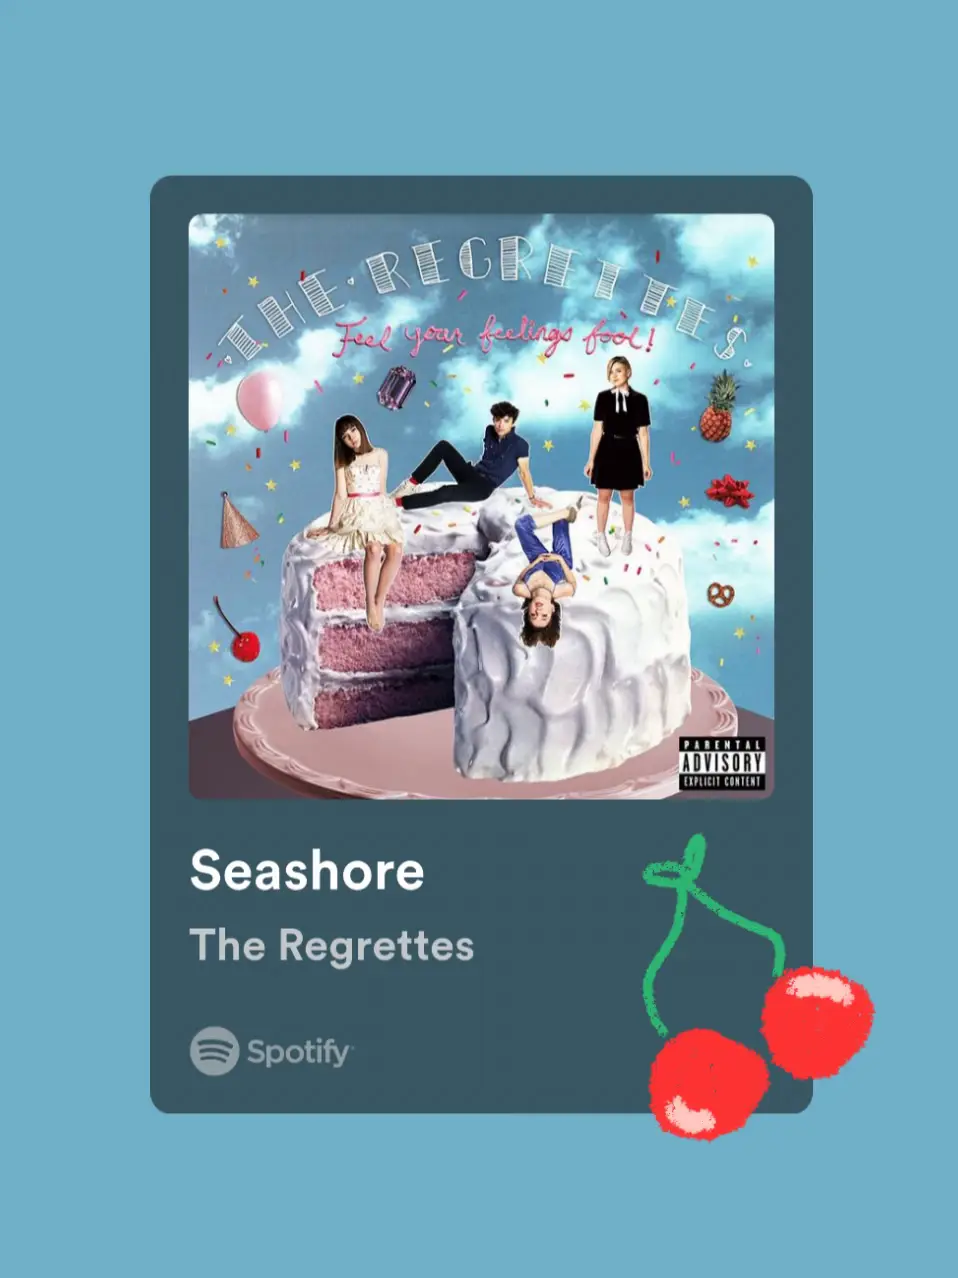  A Spotify ad for the album The Regrettes by the Seashore.